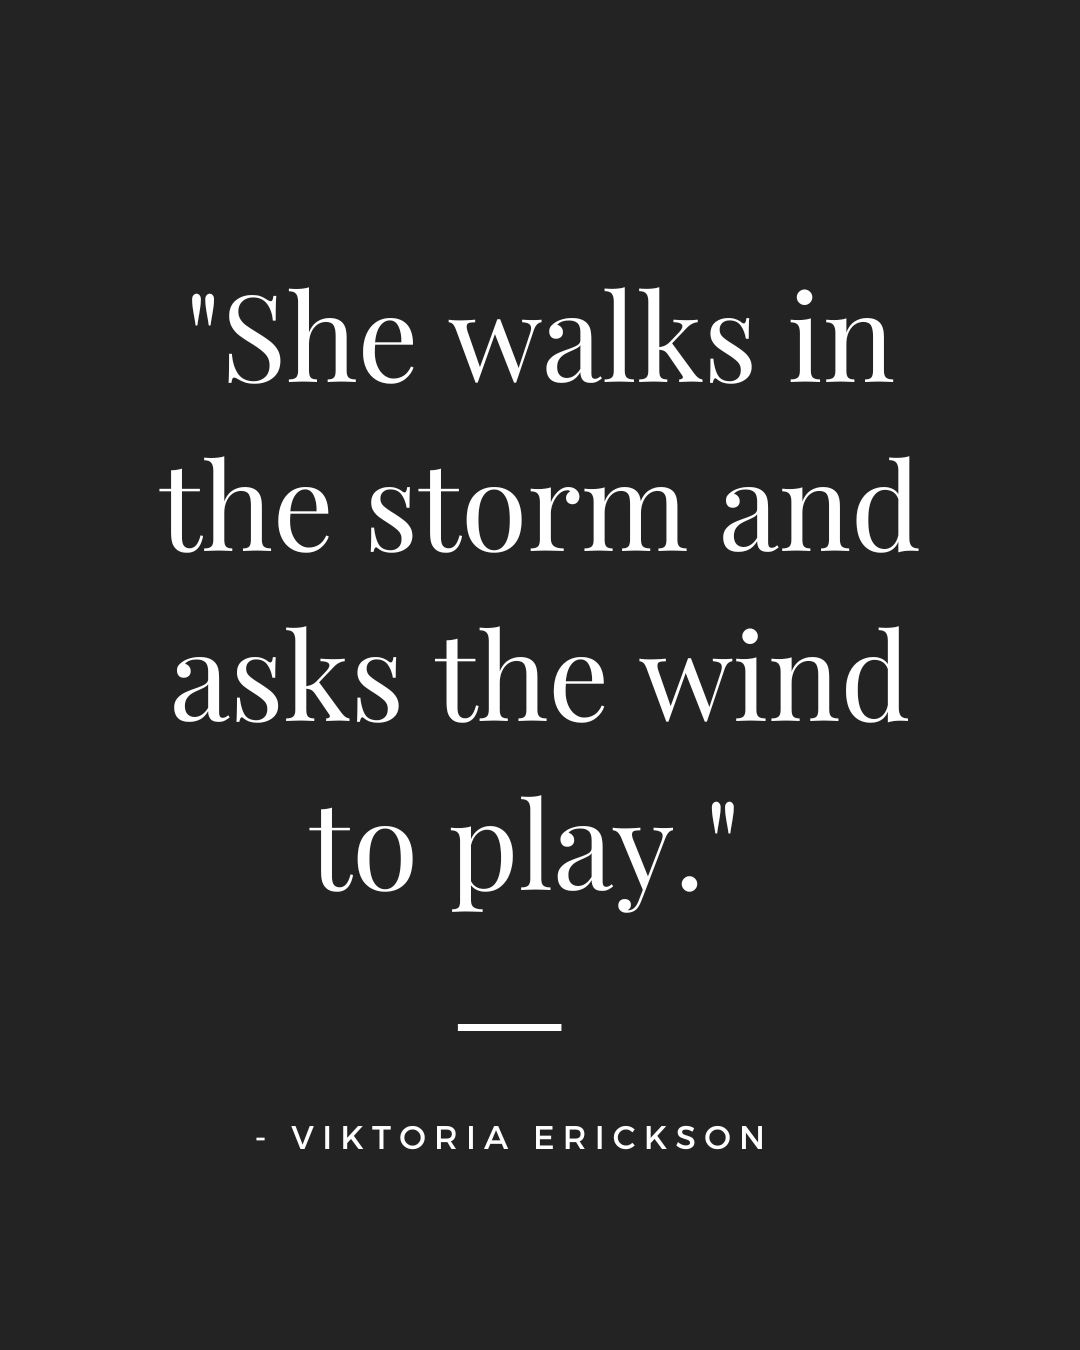 Badass Quotes for Women